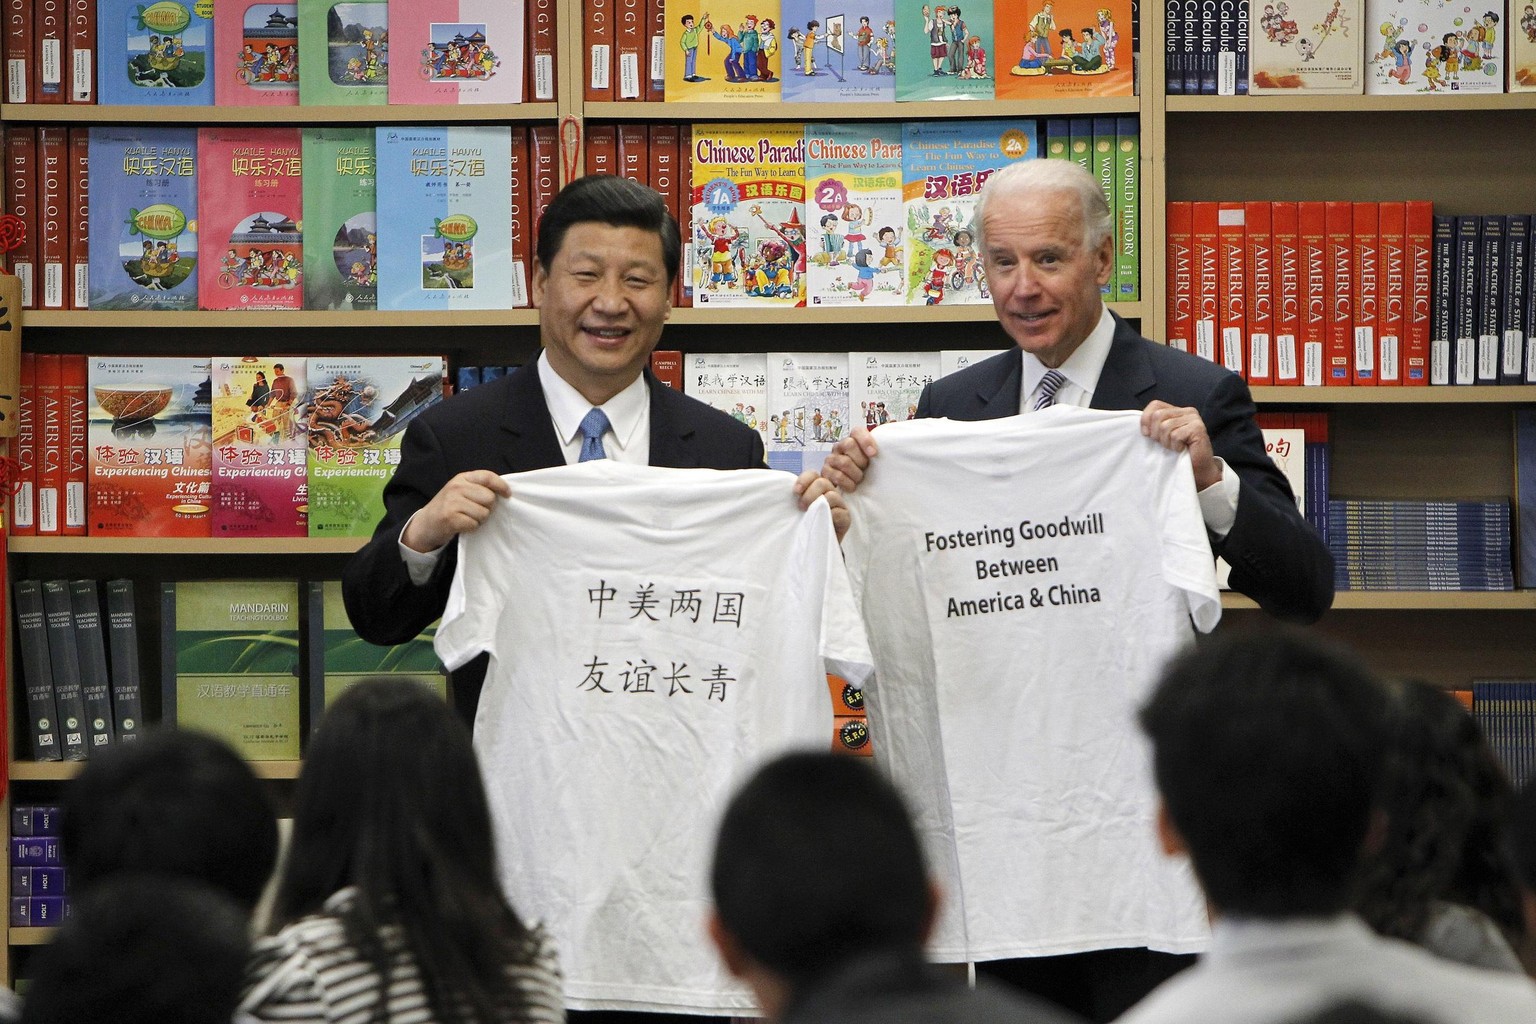 FILE - In this Friday, Feb. 17, 2012 file photo, Chinese Vice President Xi Jinping and U.S. Vice President Joe Biden hold T-shirts given to them by students during their visit to the International Stu ...